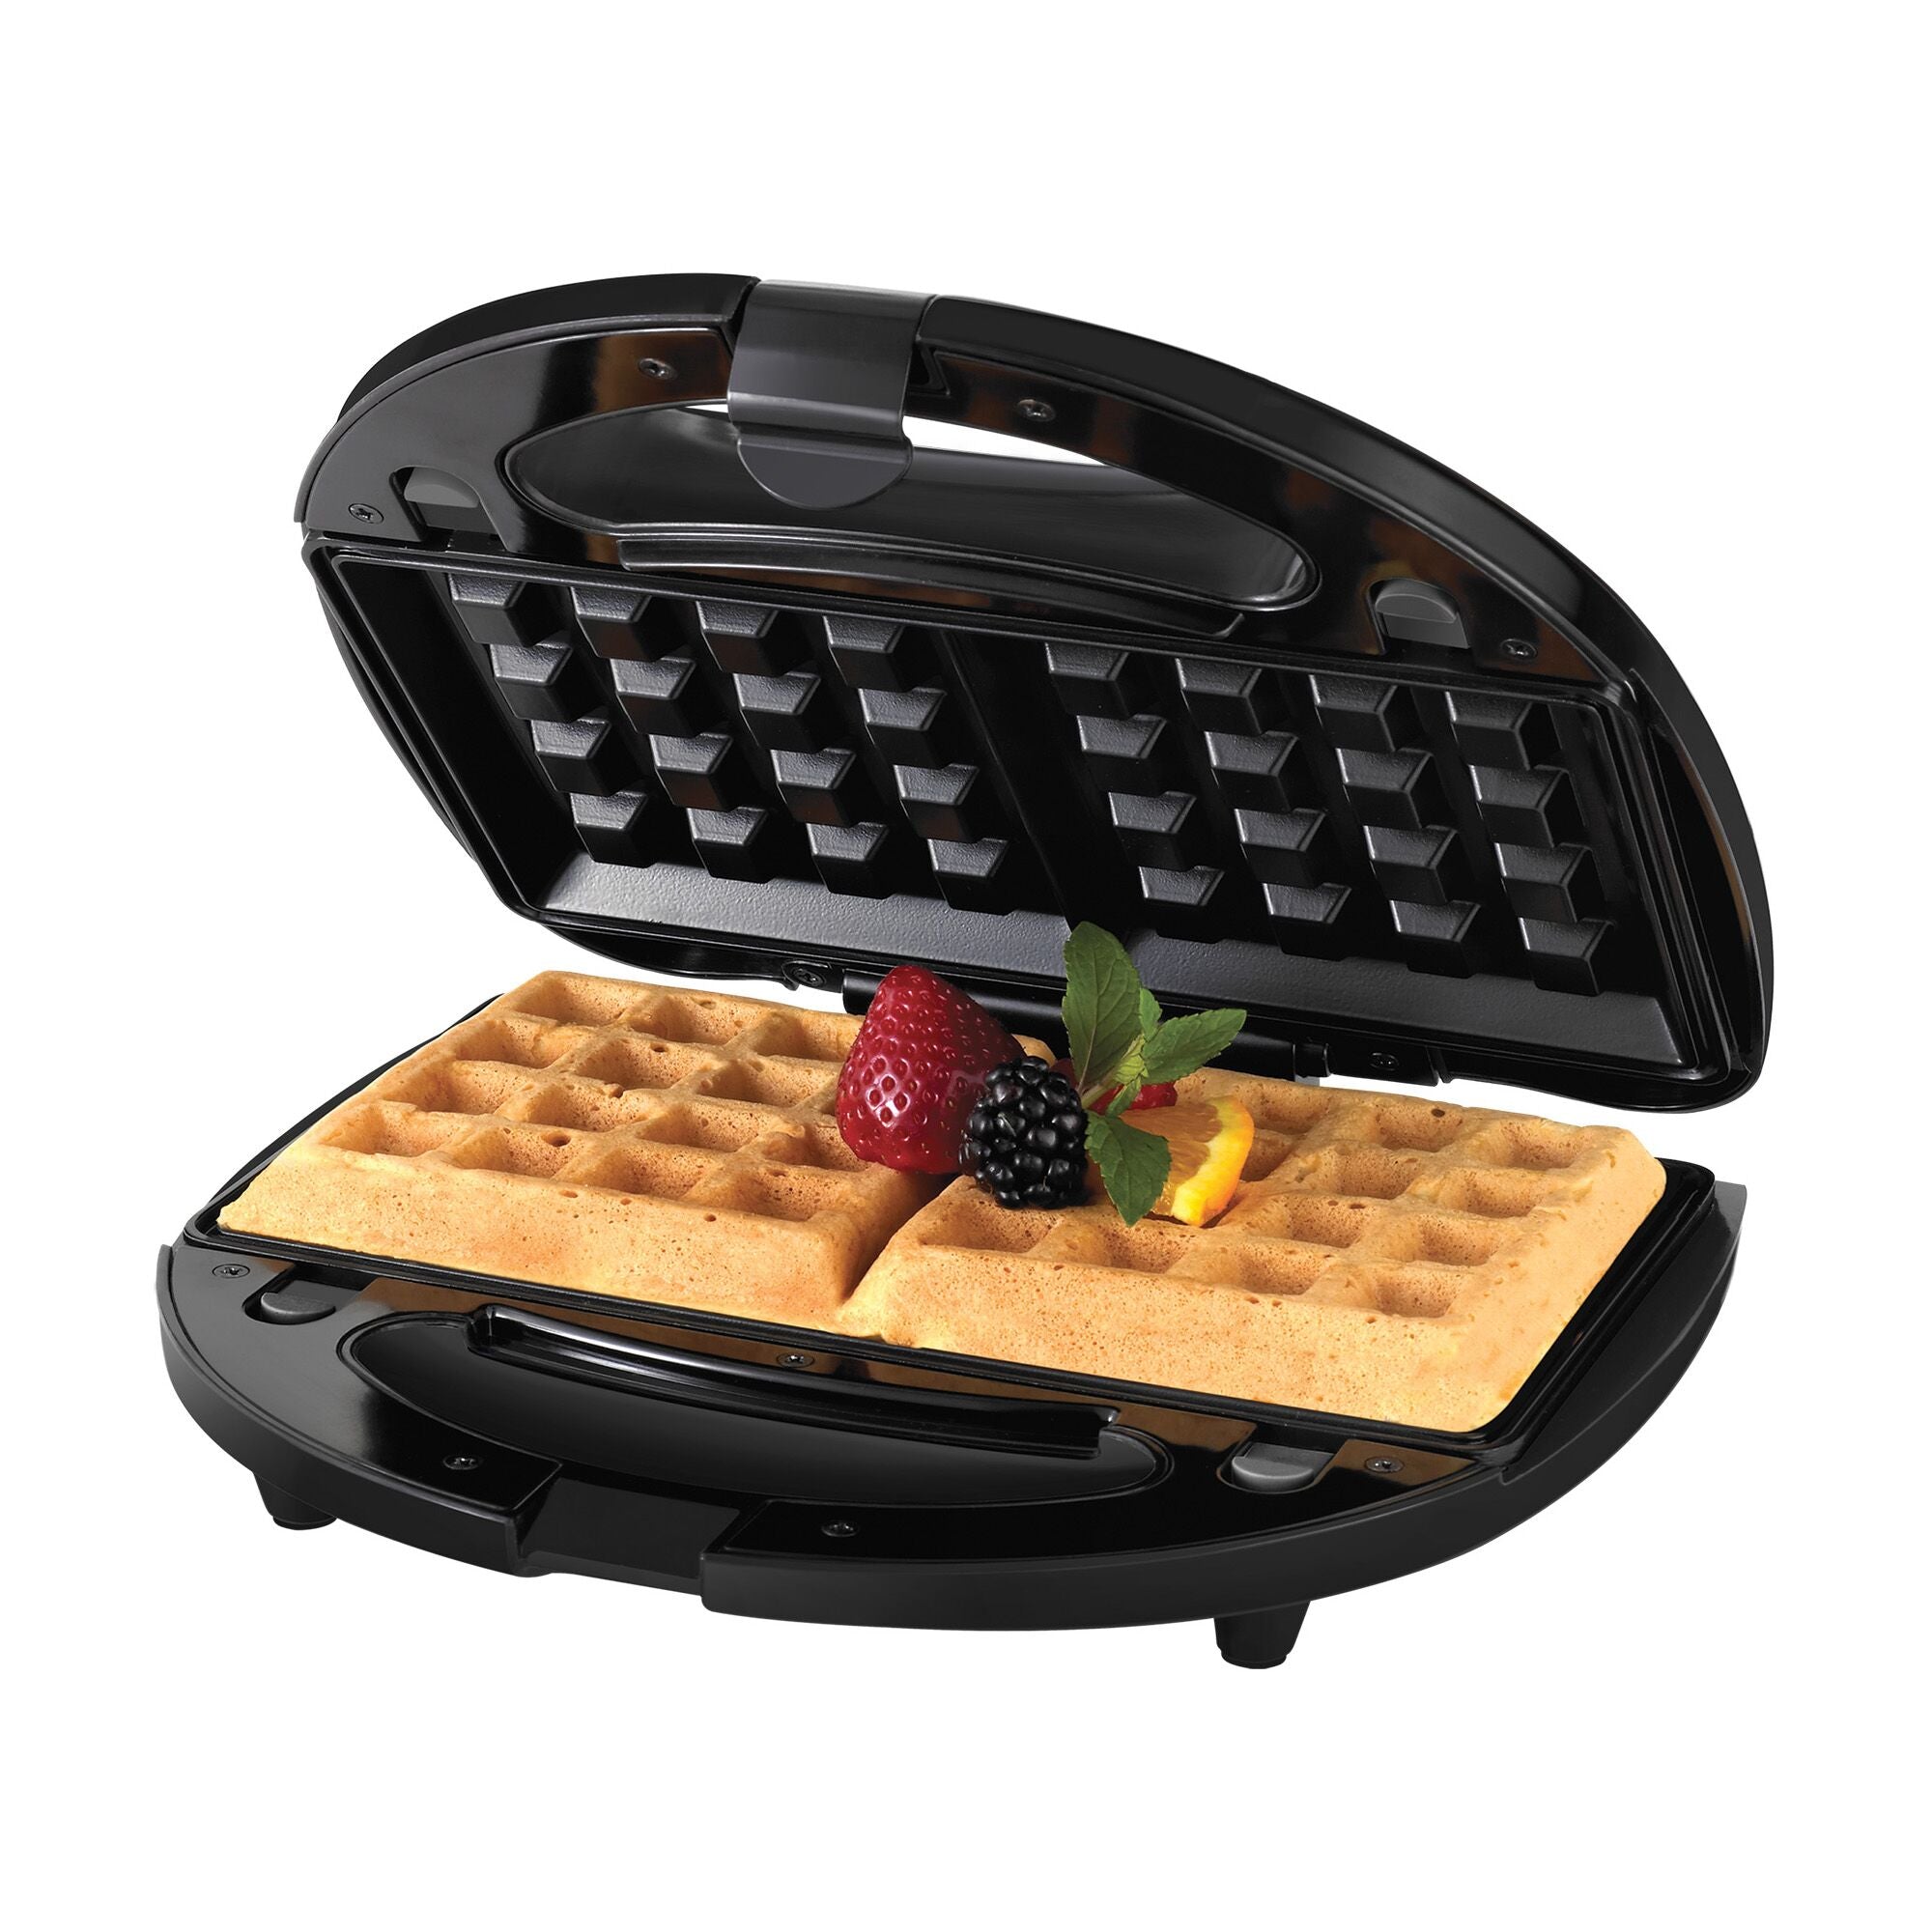 LOOK: This Super Cute Sandwich And Waffle Maker